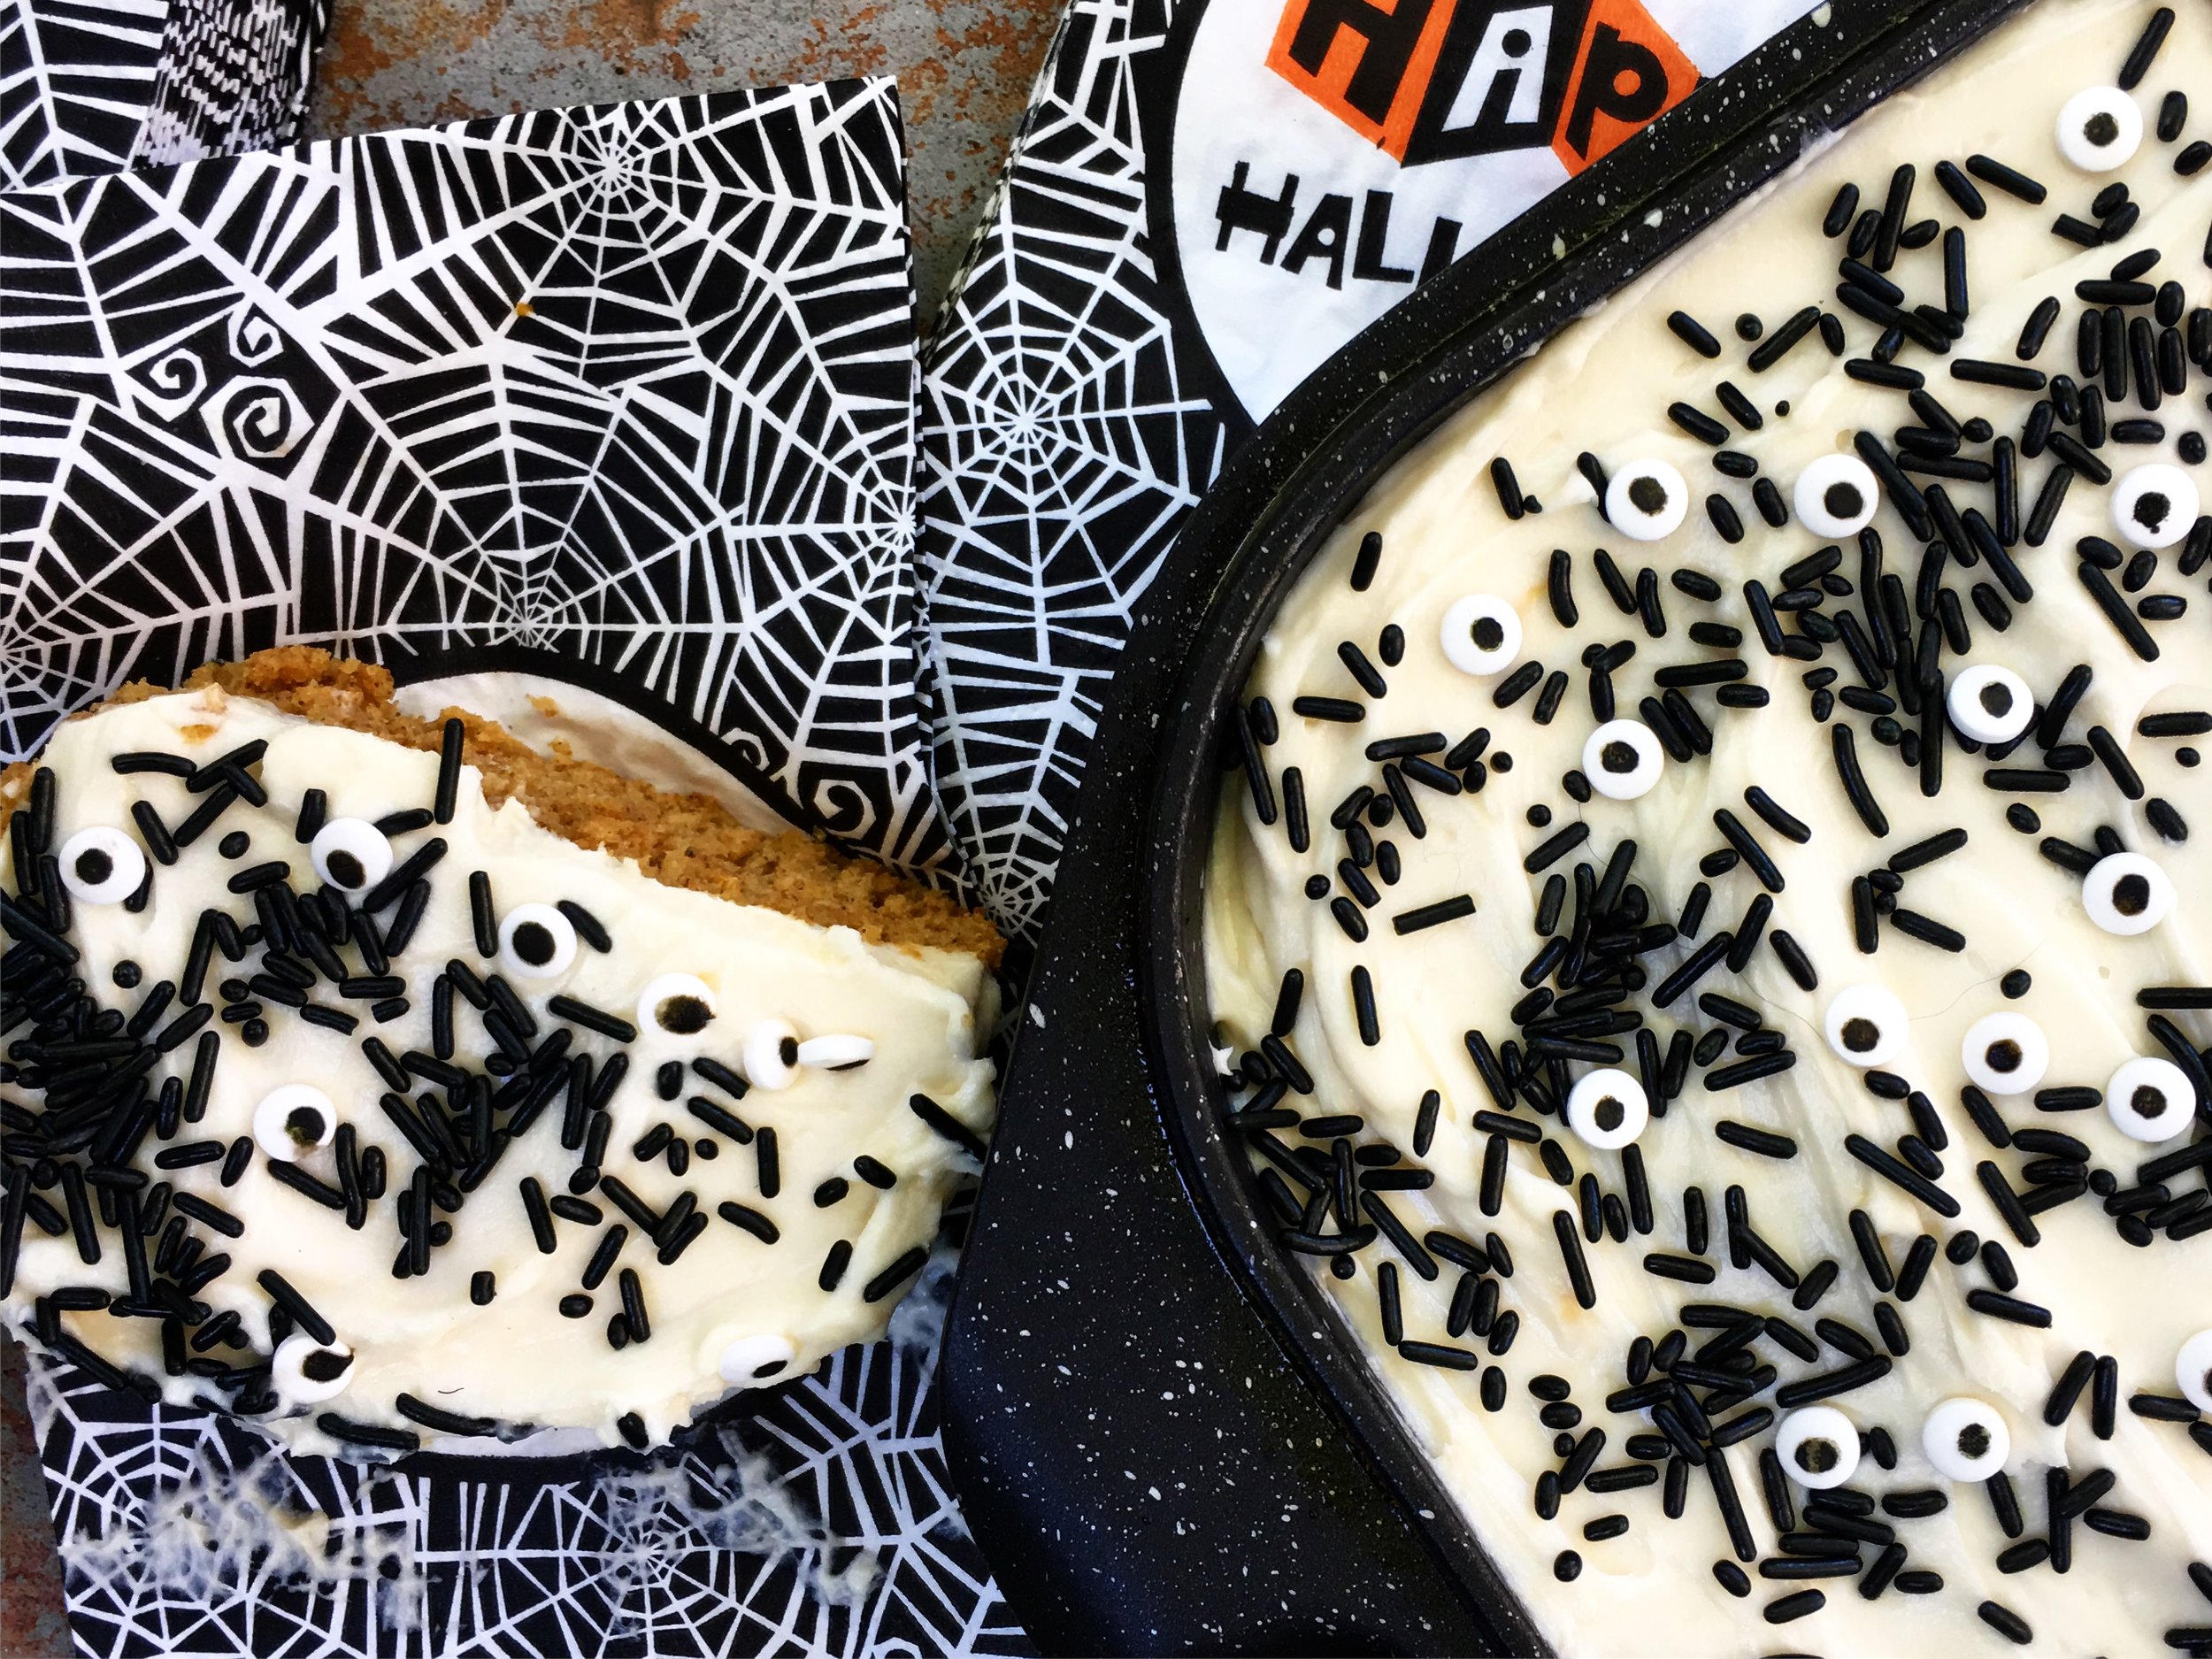 Your favorite cake recipe -- or even a reliable cake mix! -- works perfectly in the EuroCAST grill pan. This one is vanilla spice with cream cheese frosting covered in black sprinkles and lots of “I see you" eyes. Nothing like lots of delicious cake with a side of paranoia for Halloween.